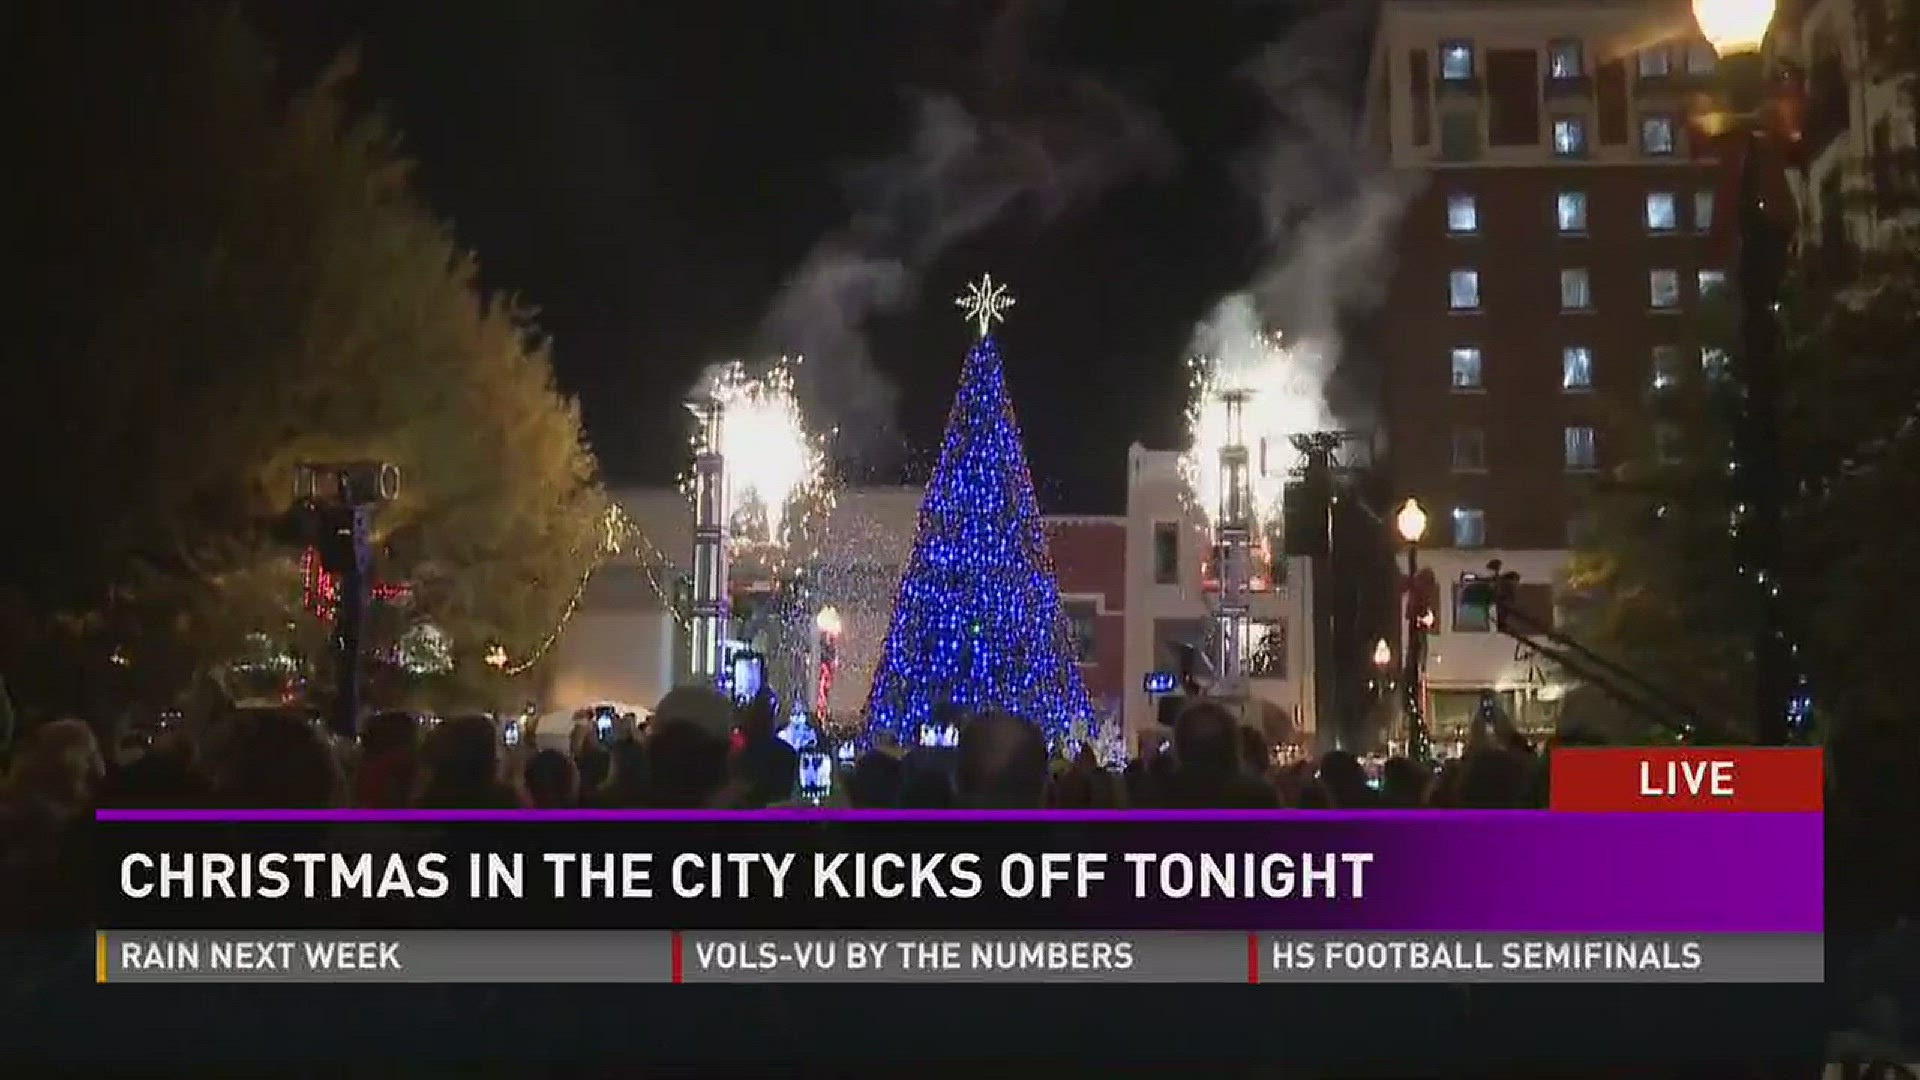 Nov. 25, 2016: It's Christmas in Knoxville! The city lit the 42-foot Christmas tree in Krutch Park Friday night.